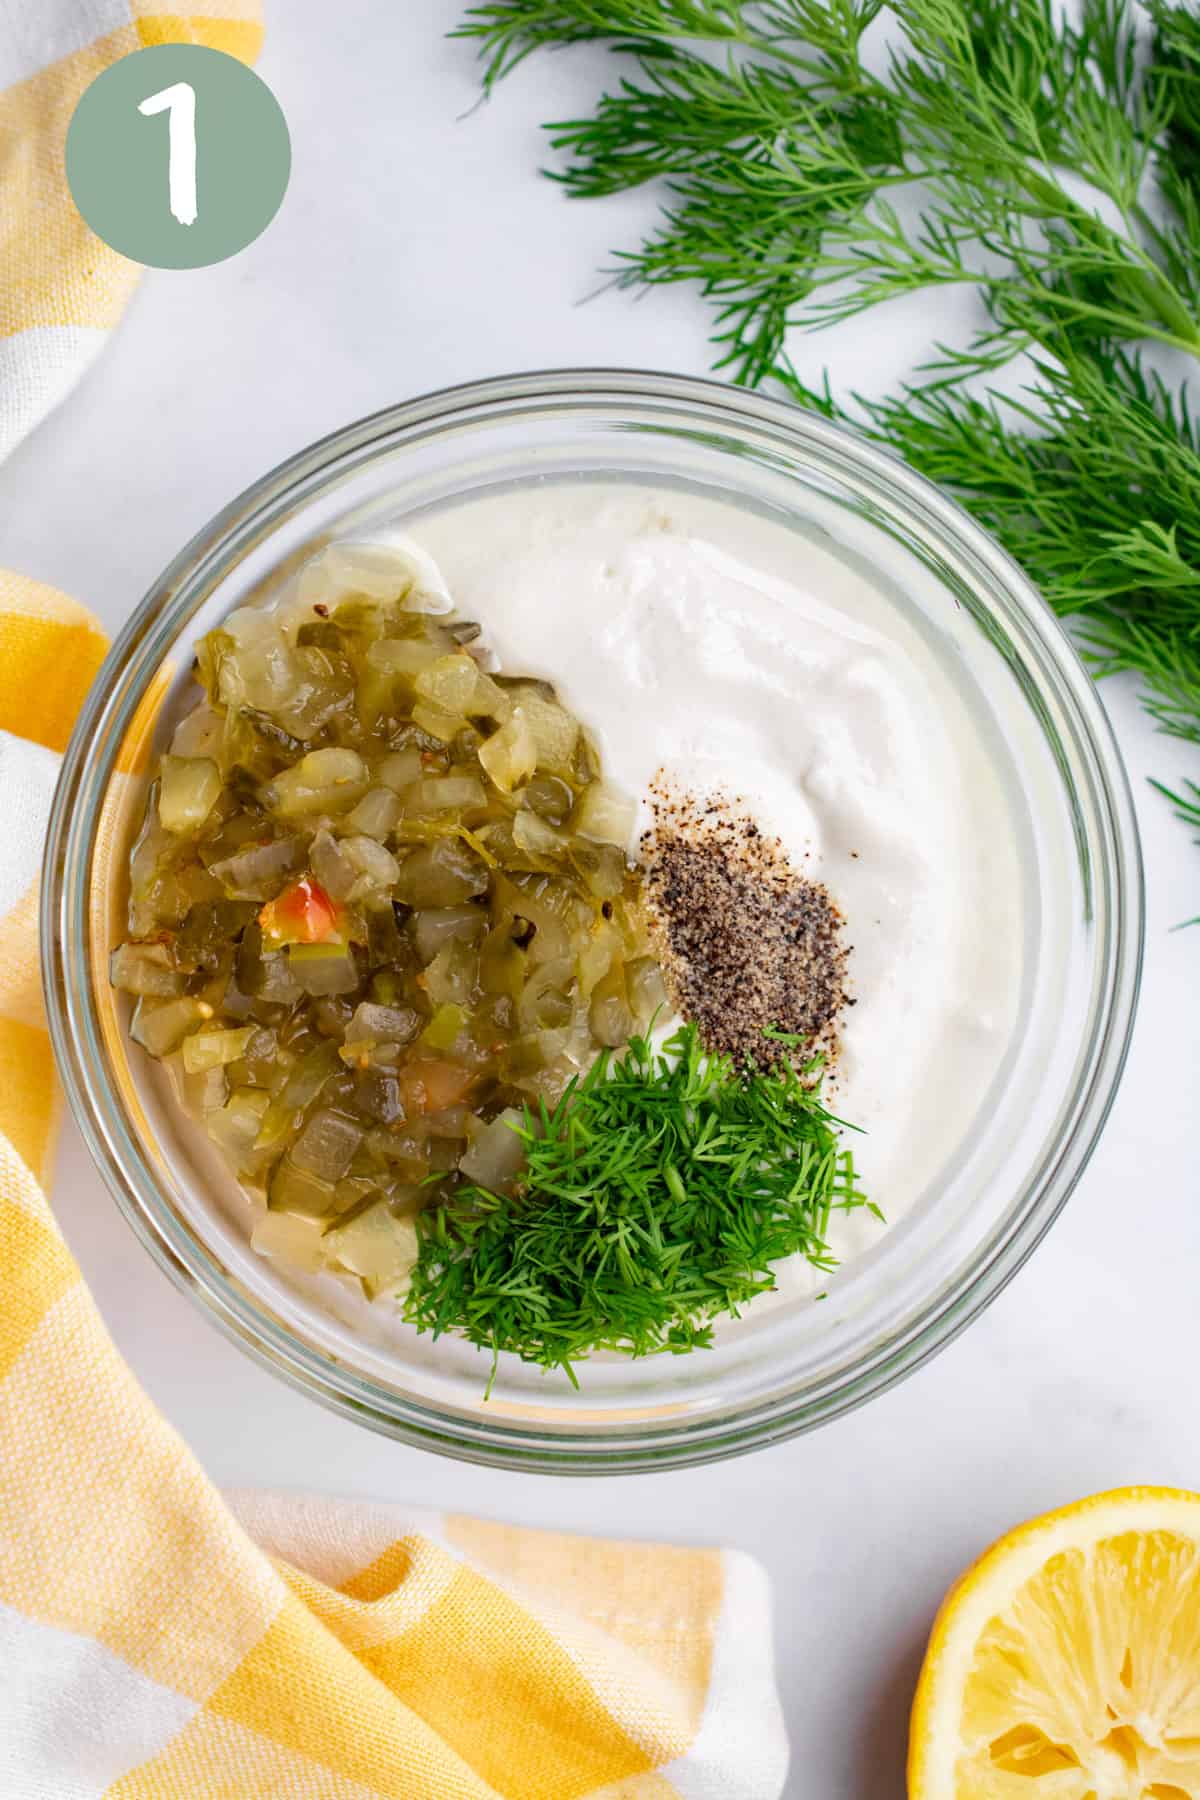 vegan mayo, dill relish, black pepper, fresh dill, and lemon juice in a glass bowl.